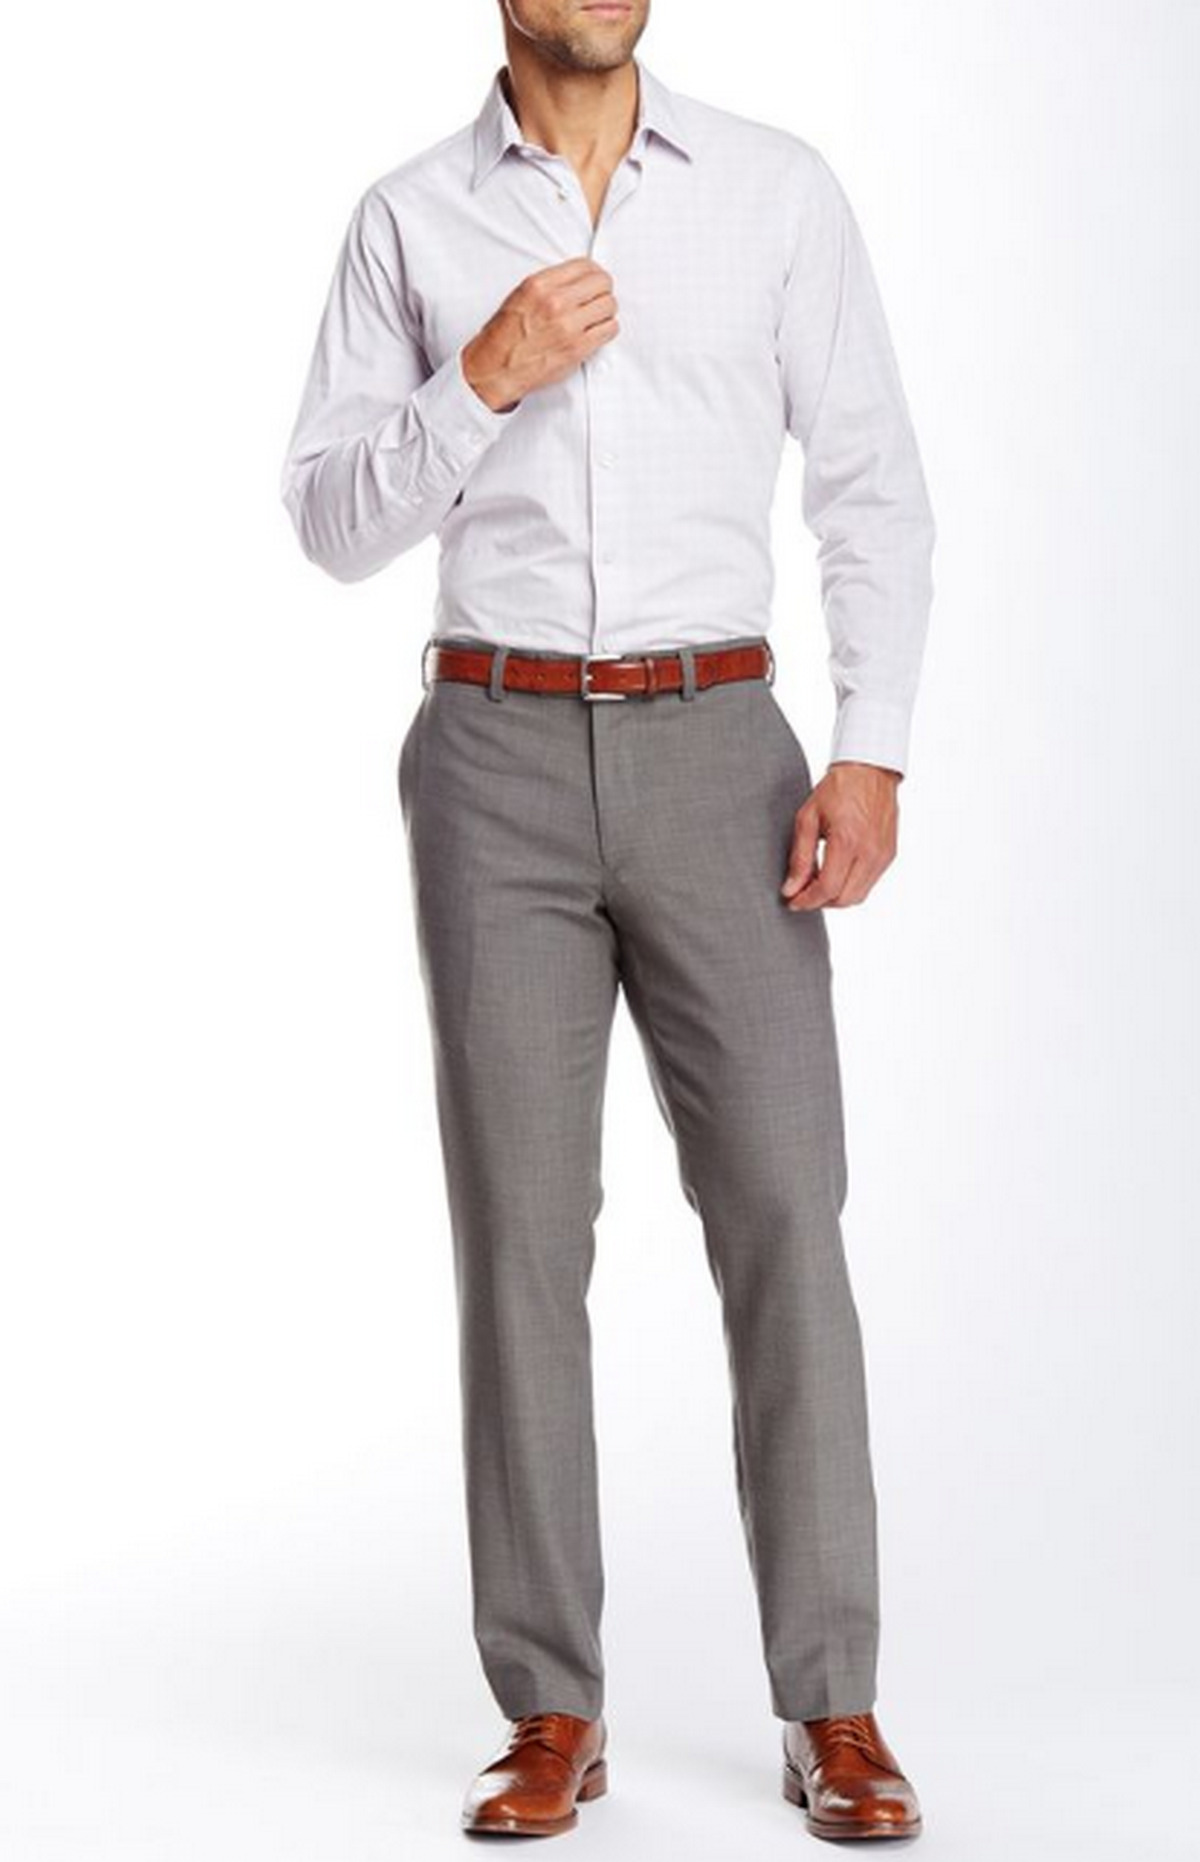 Gray Pants And Brown Shoes For Men